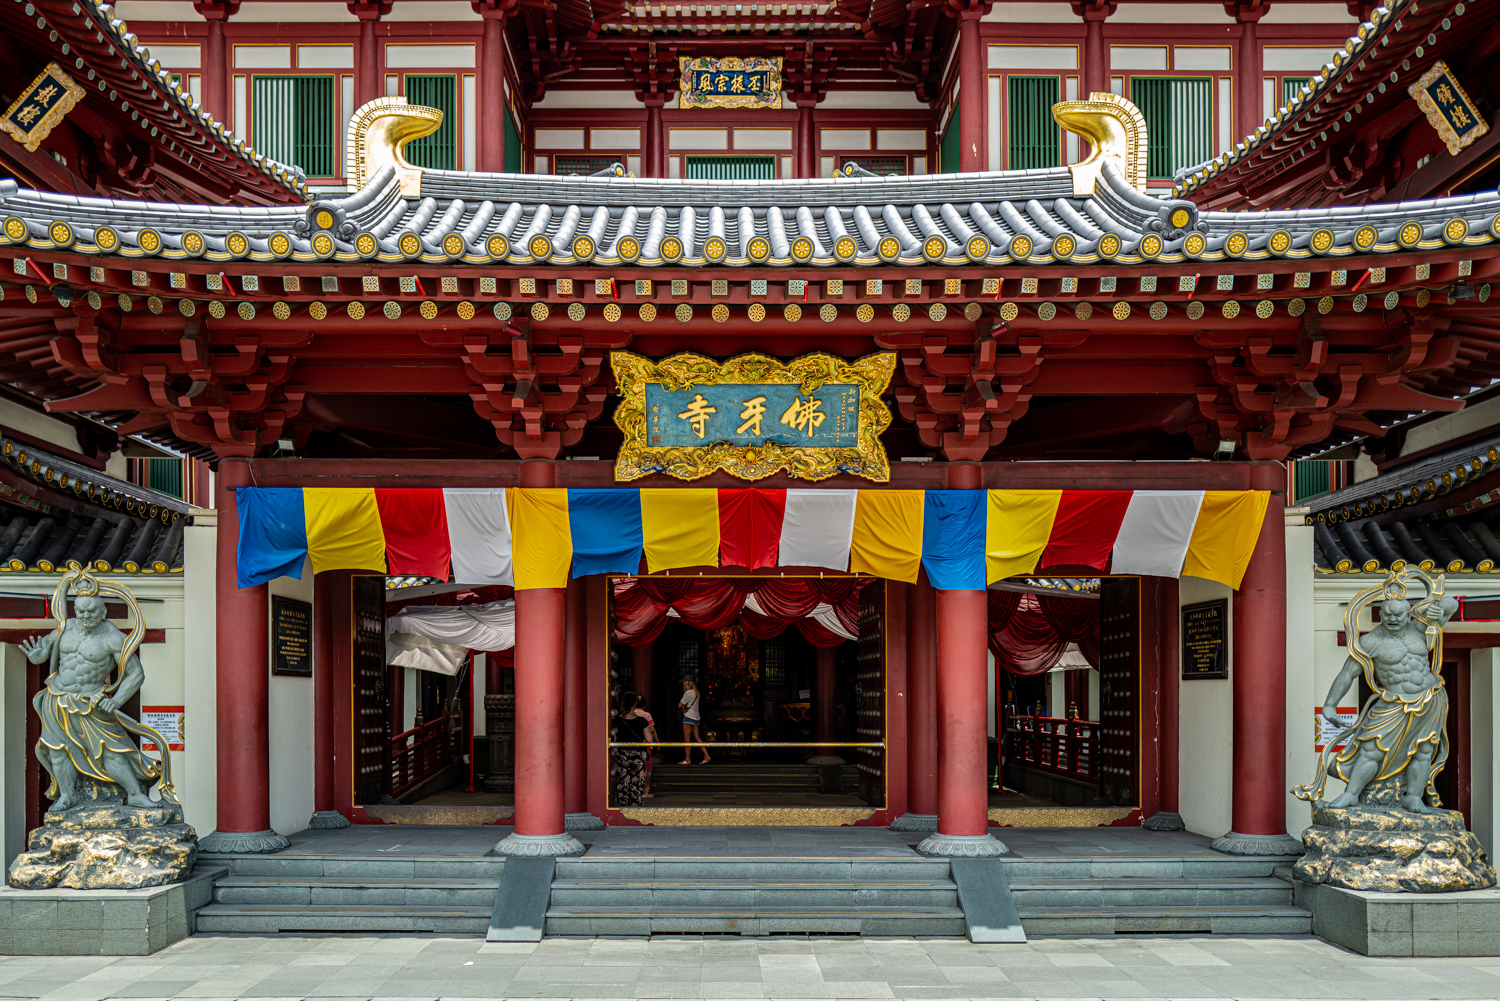 Entrance of Buddha Tooth Relic Temple, Chinatown